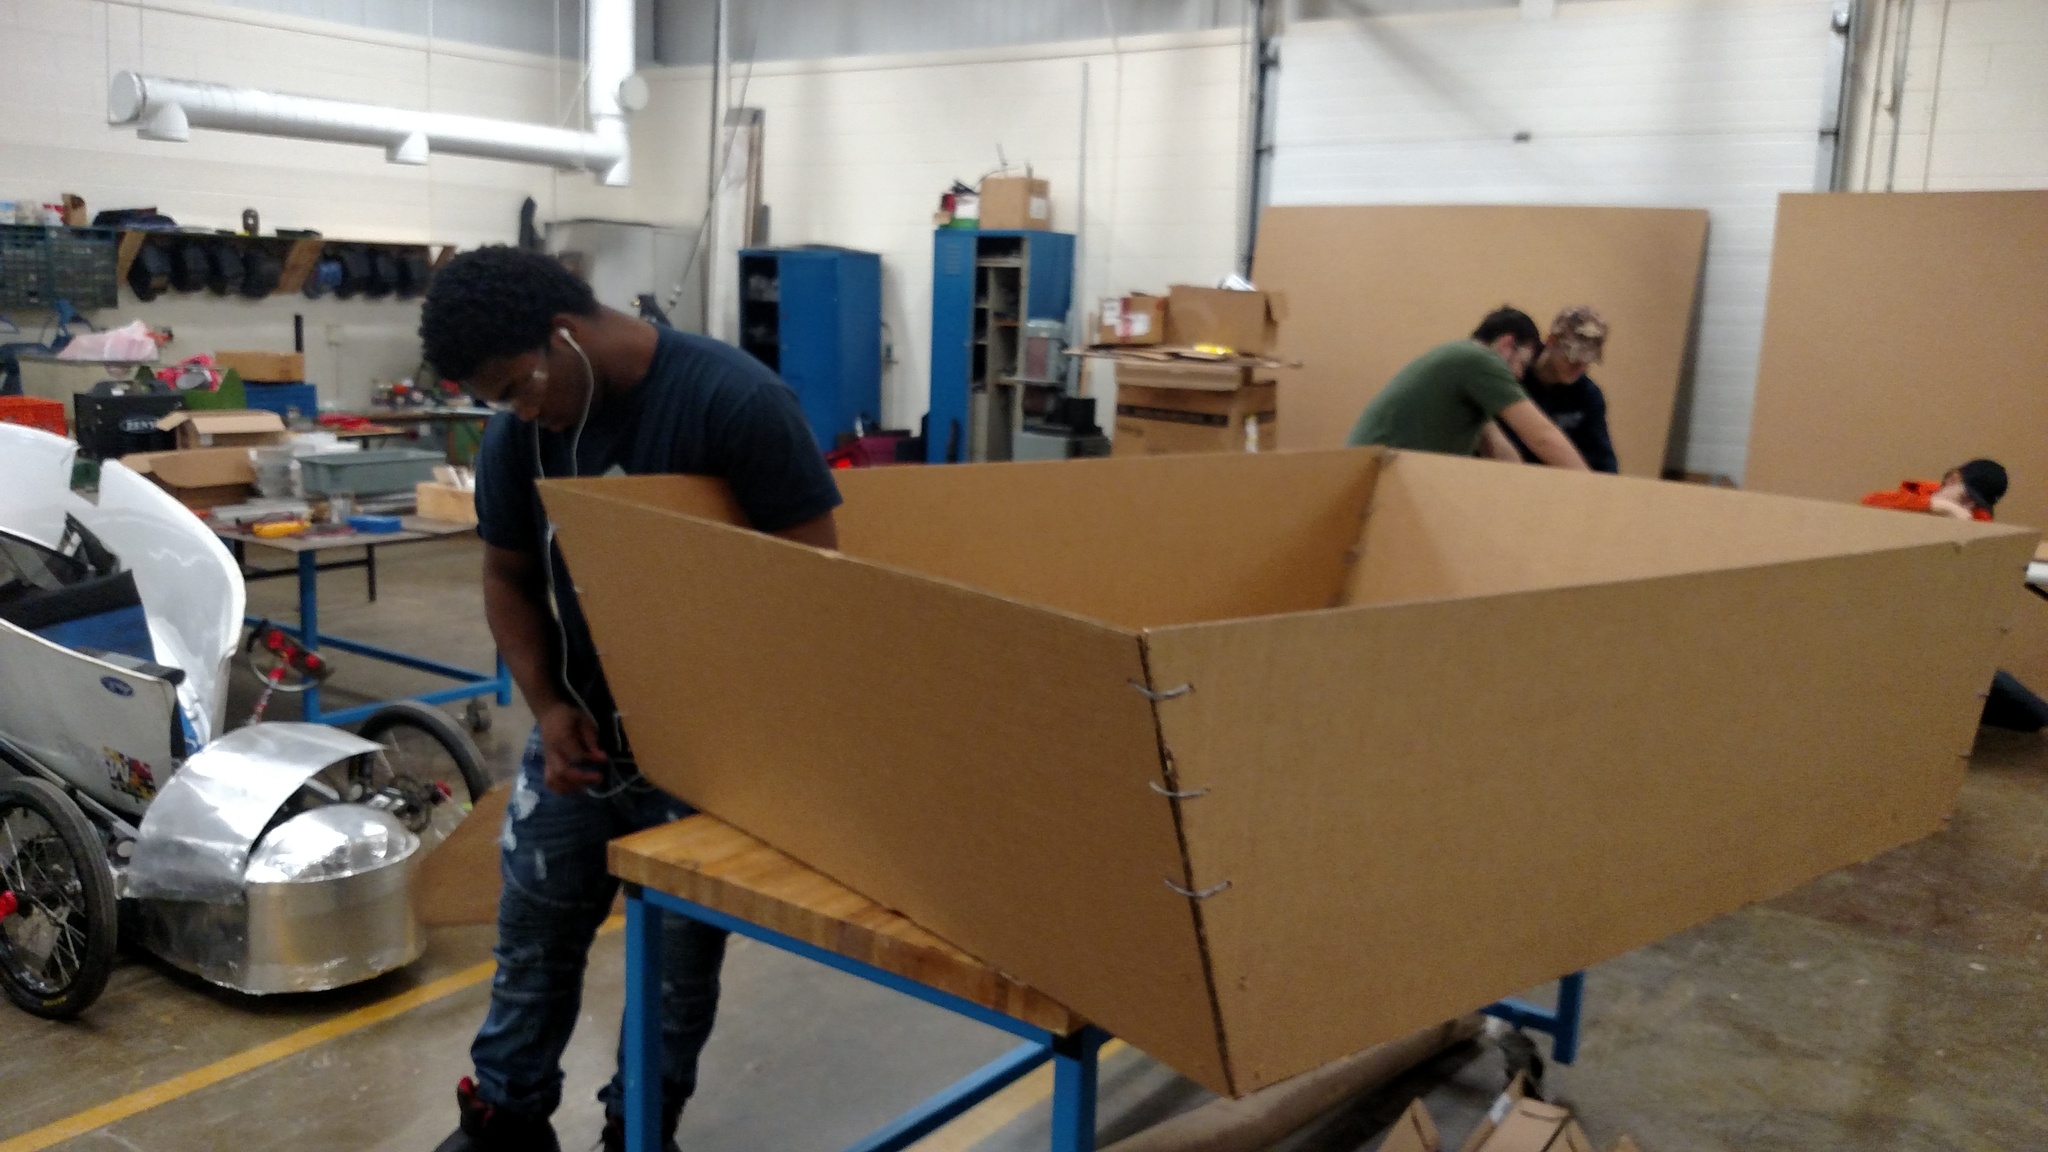 Students working on building cardboard boats for a race.